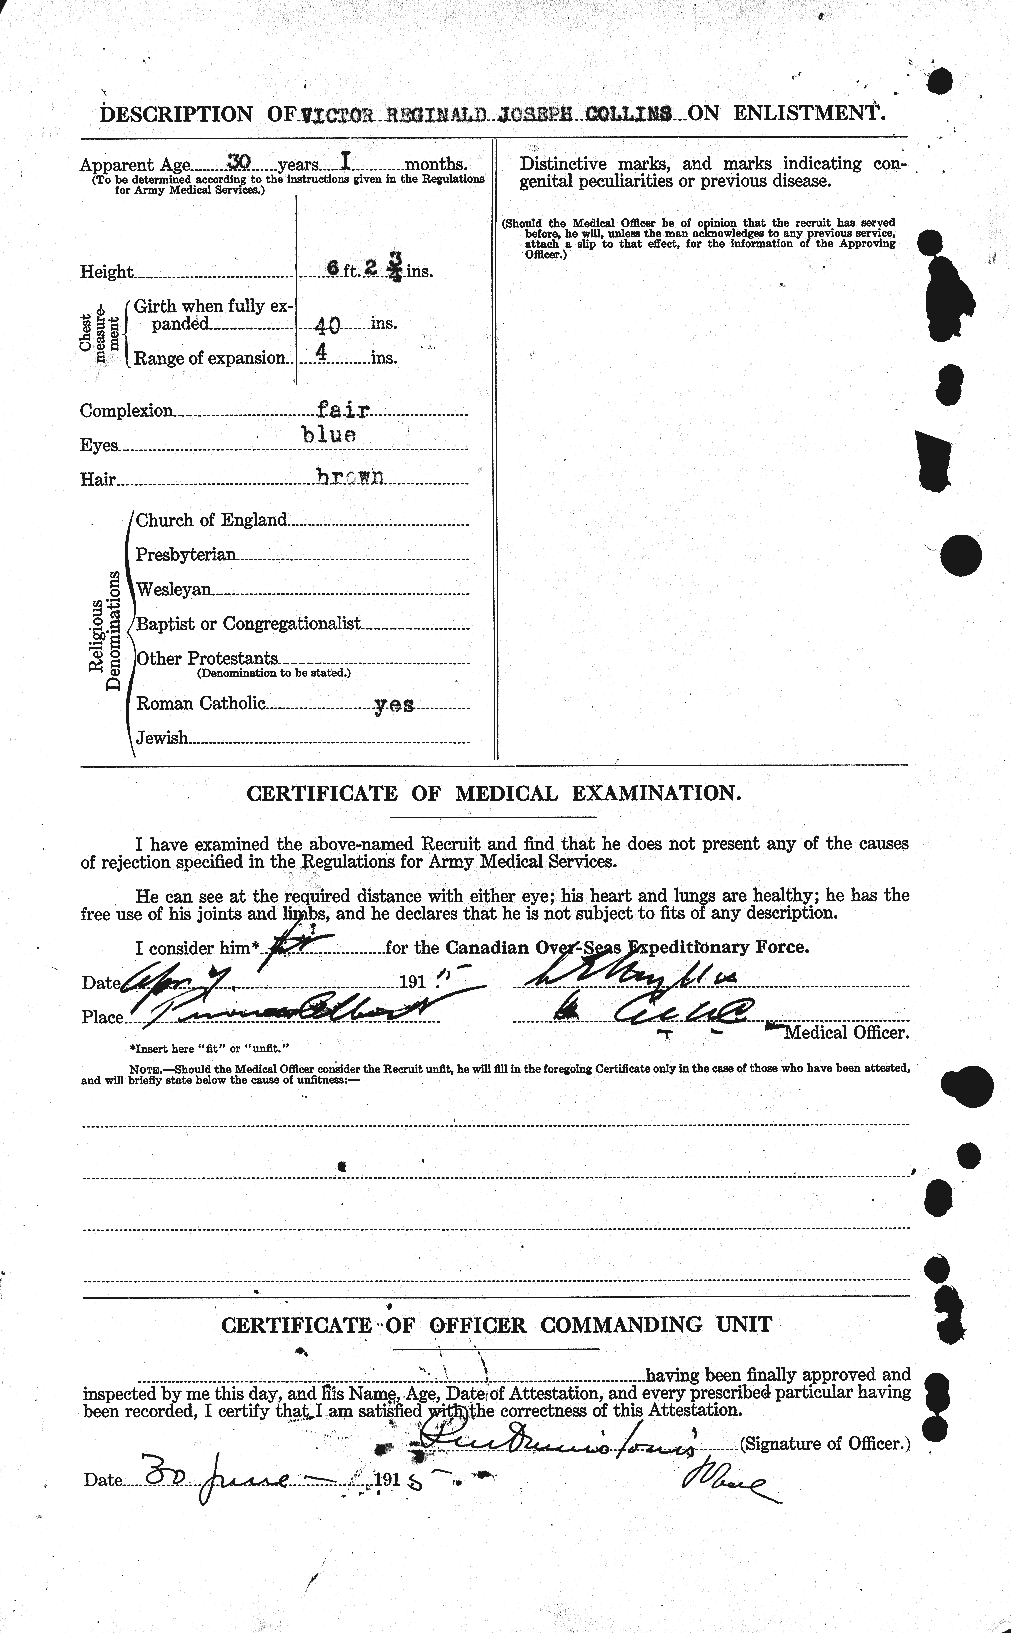 Personnel Records of the First World War - CEF 068841b